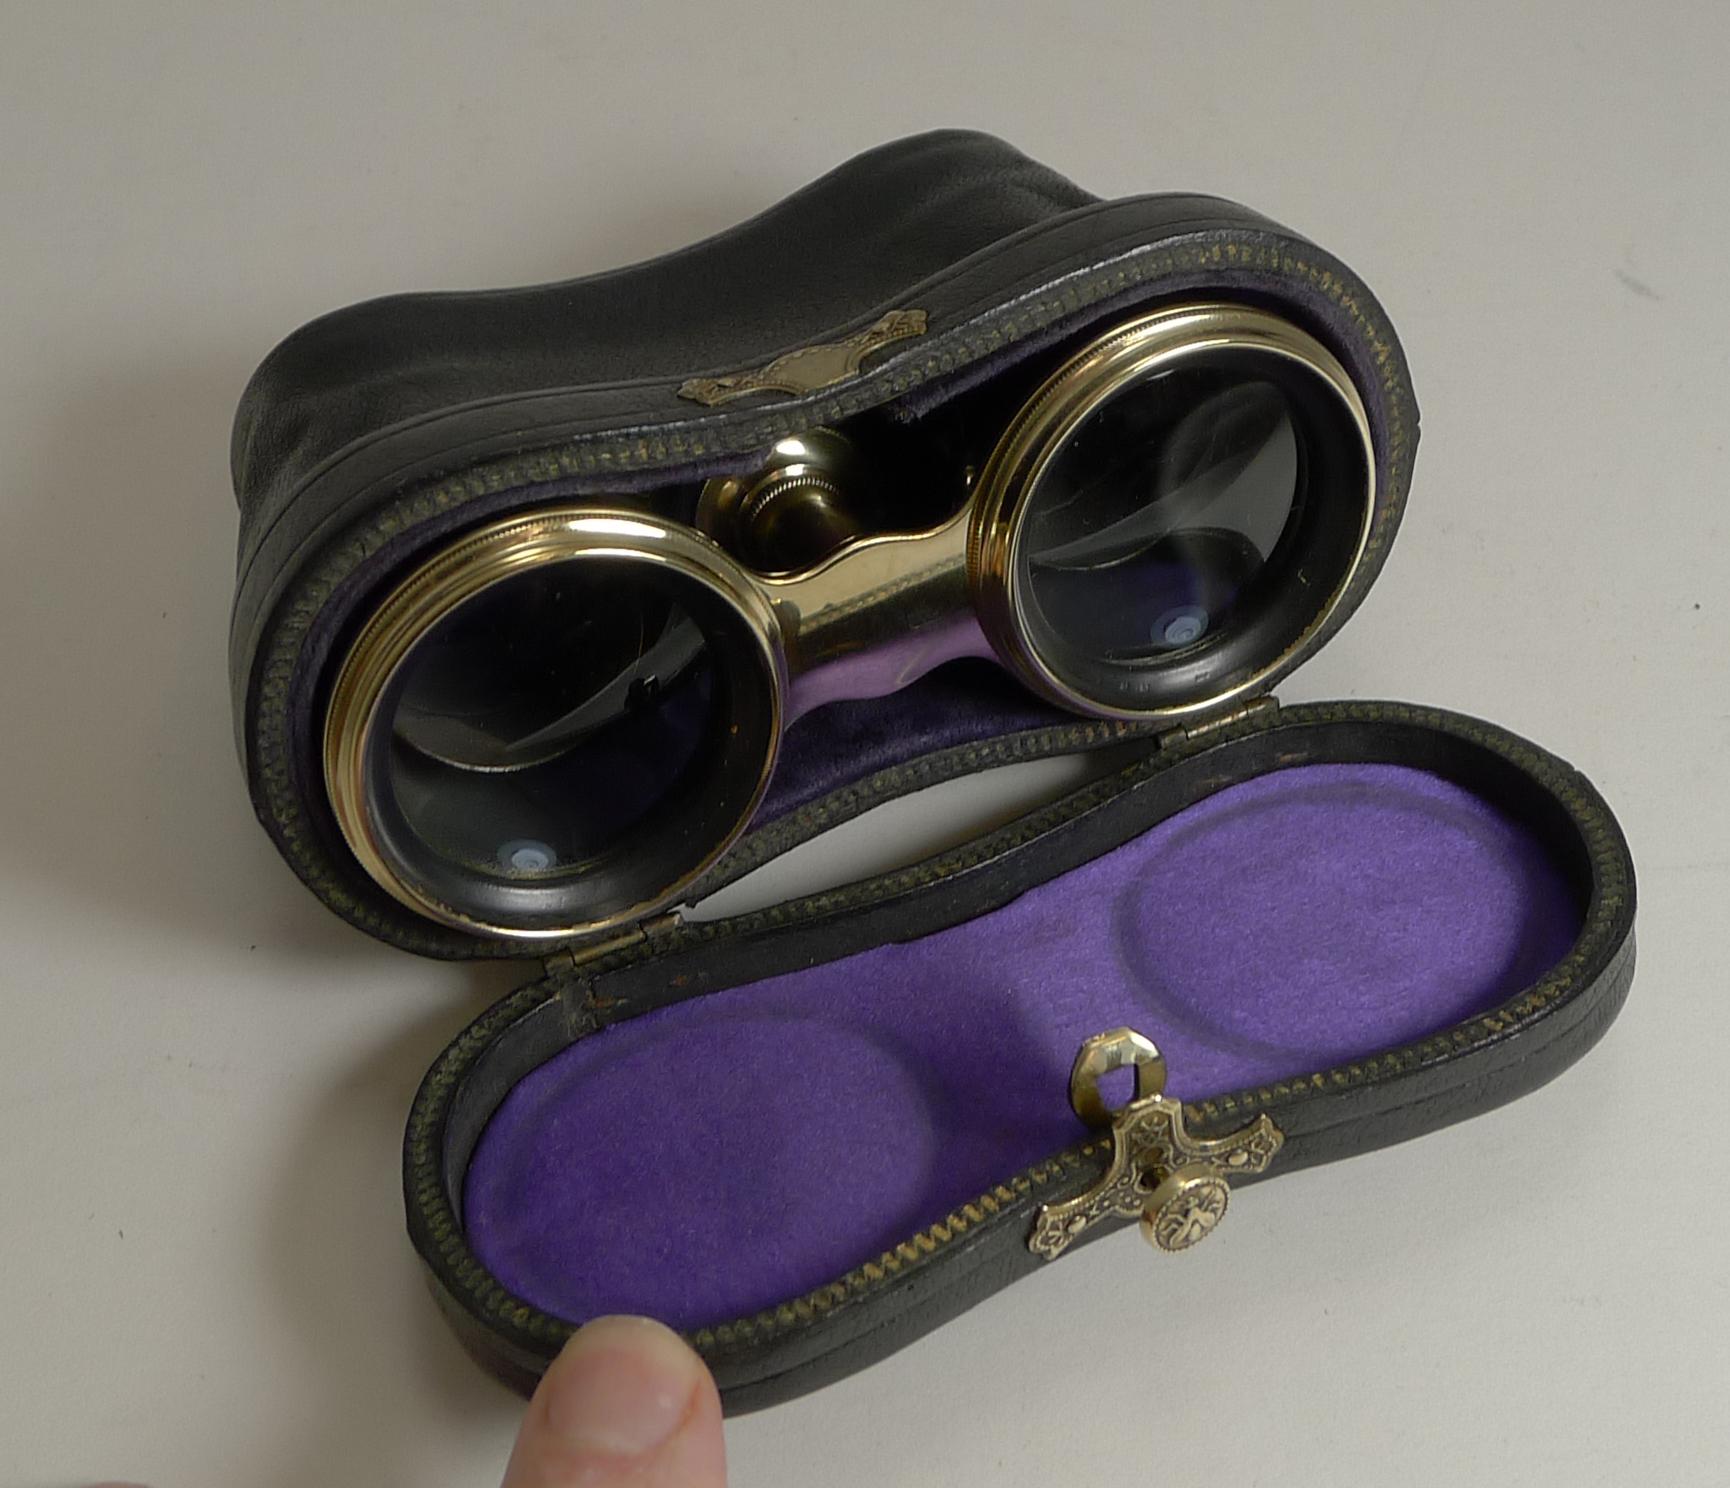 A truly exquisite pair of Opera Glasses by the top-notch maker, LeMaire of Paris 3